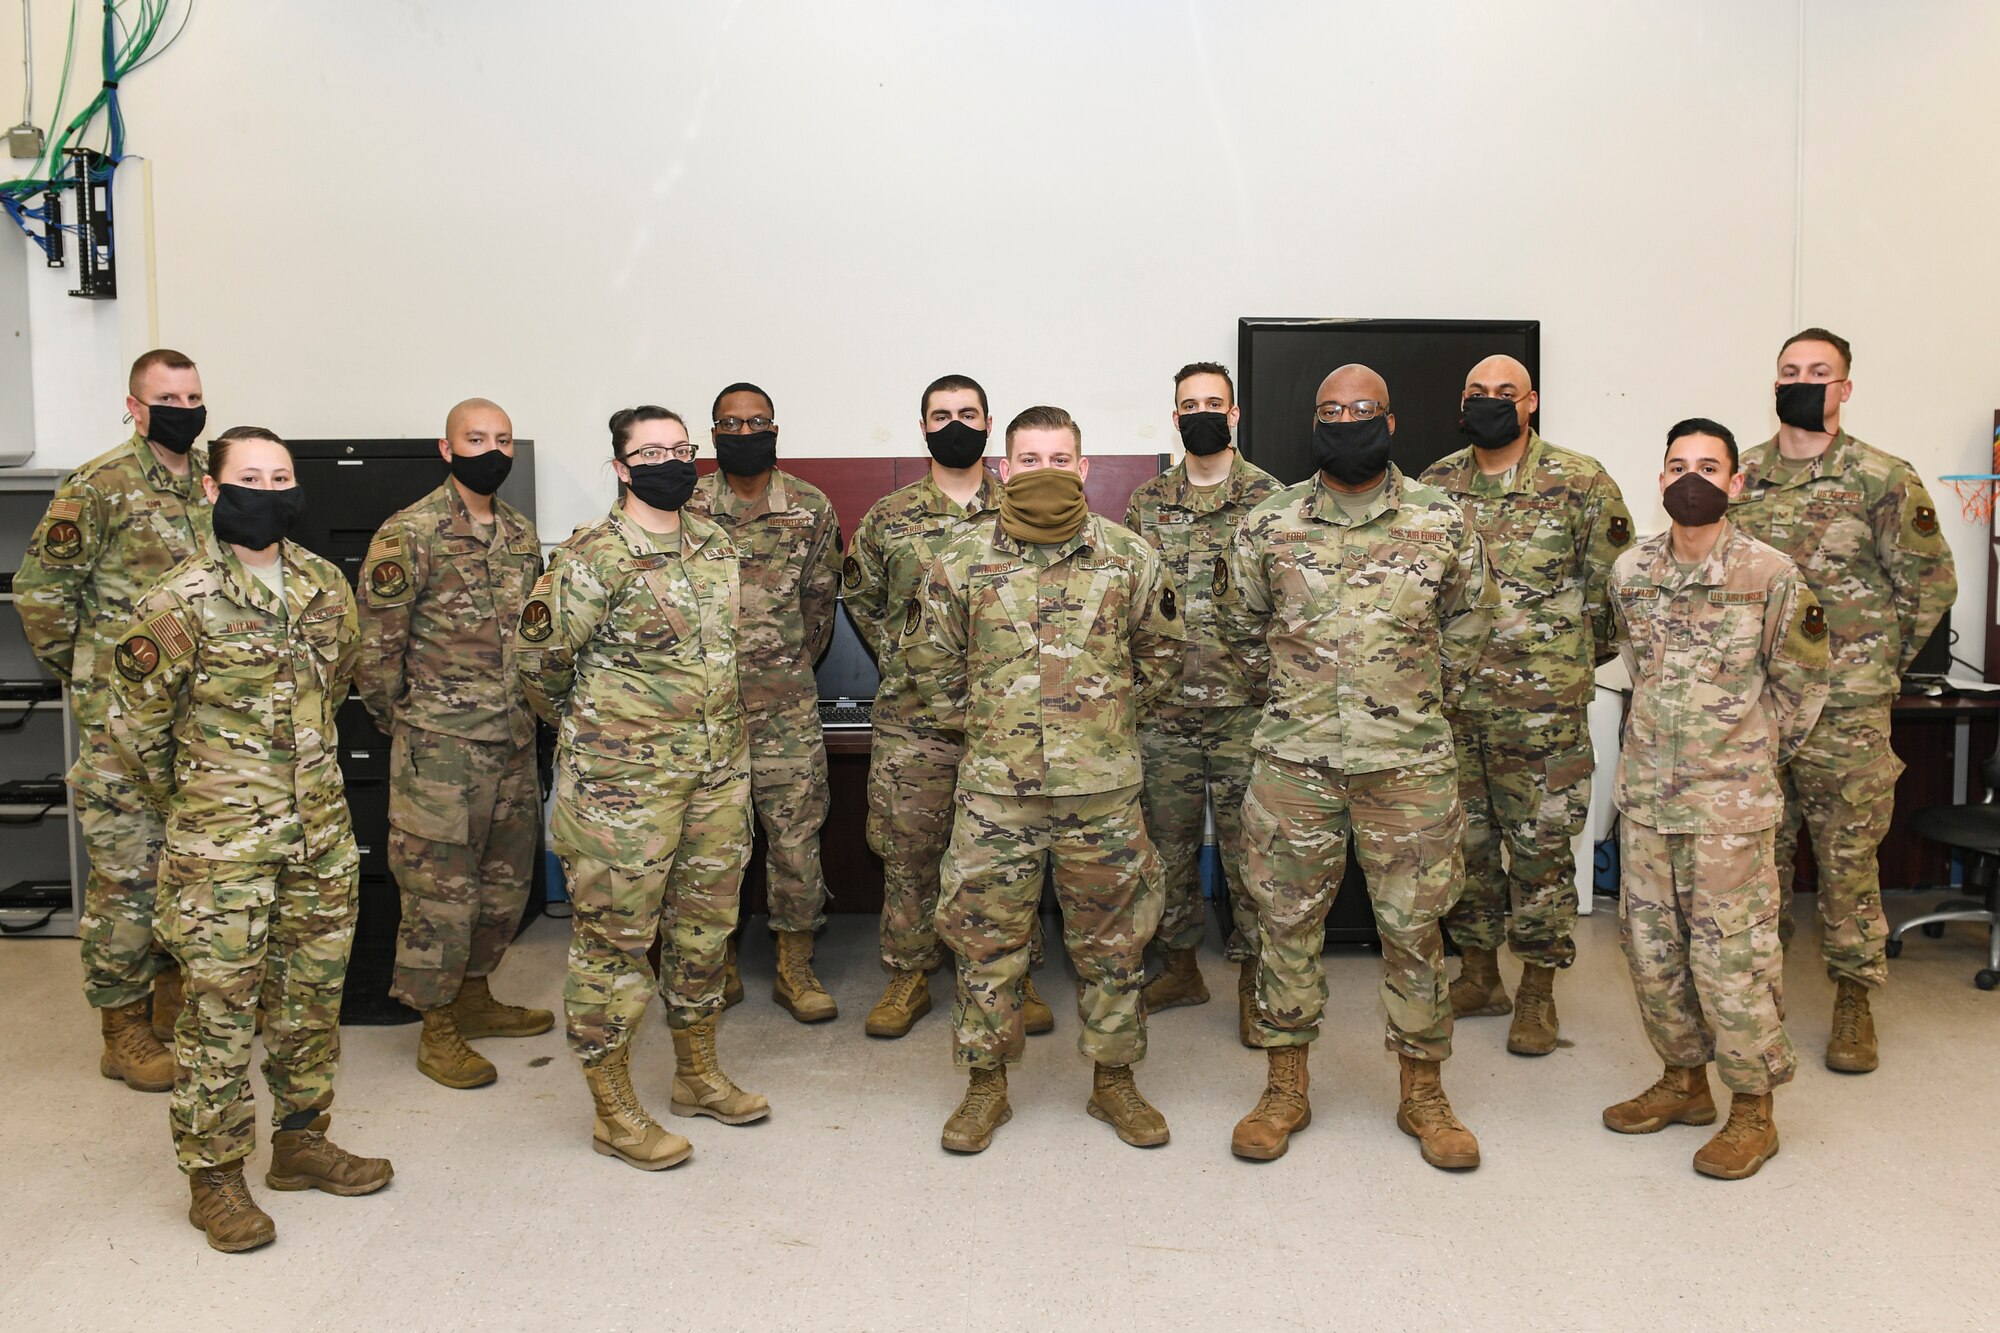 Group photo of Airman wearing face coverings